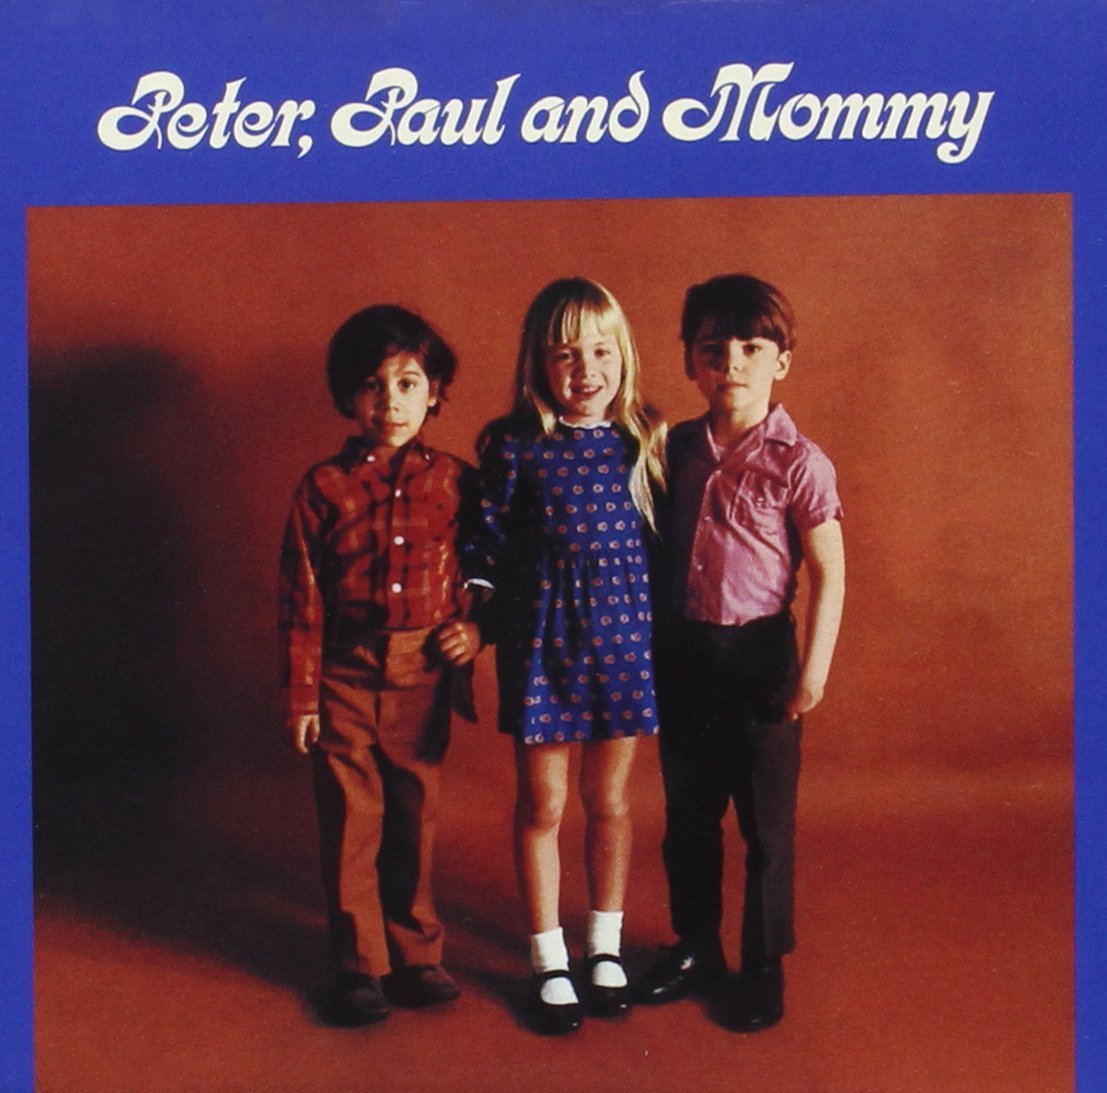 【CD】Peter, Paul and Mary（ピーター・ポール&マリー）「Peter, Paul and Mommy」ー歌詞・対訳付ー 匿名配送・送料無料